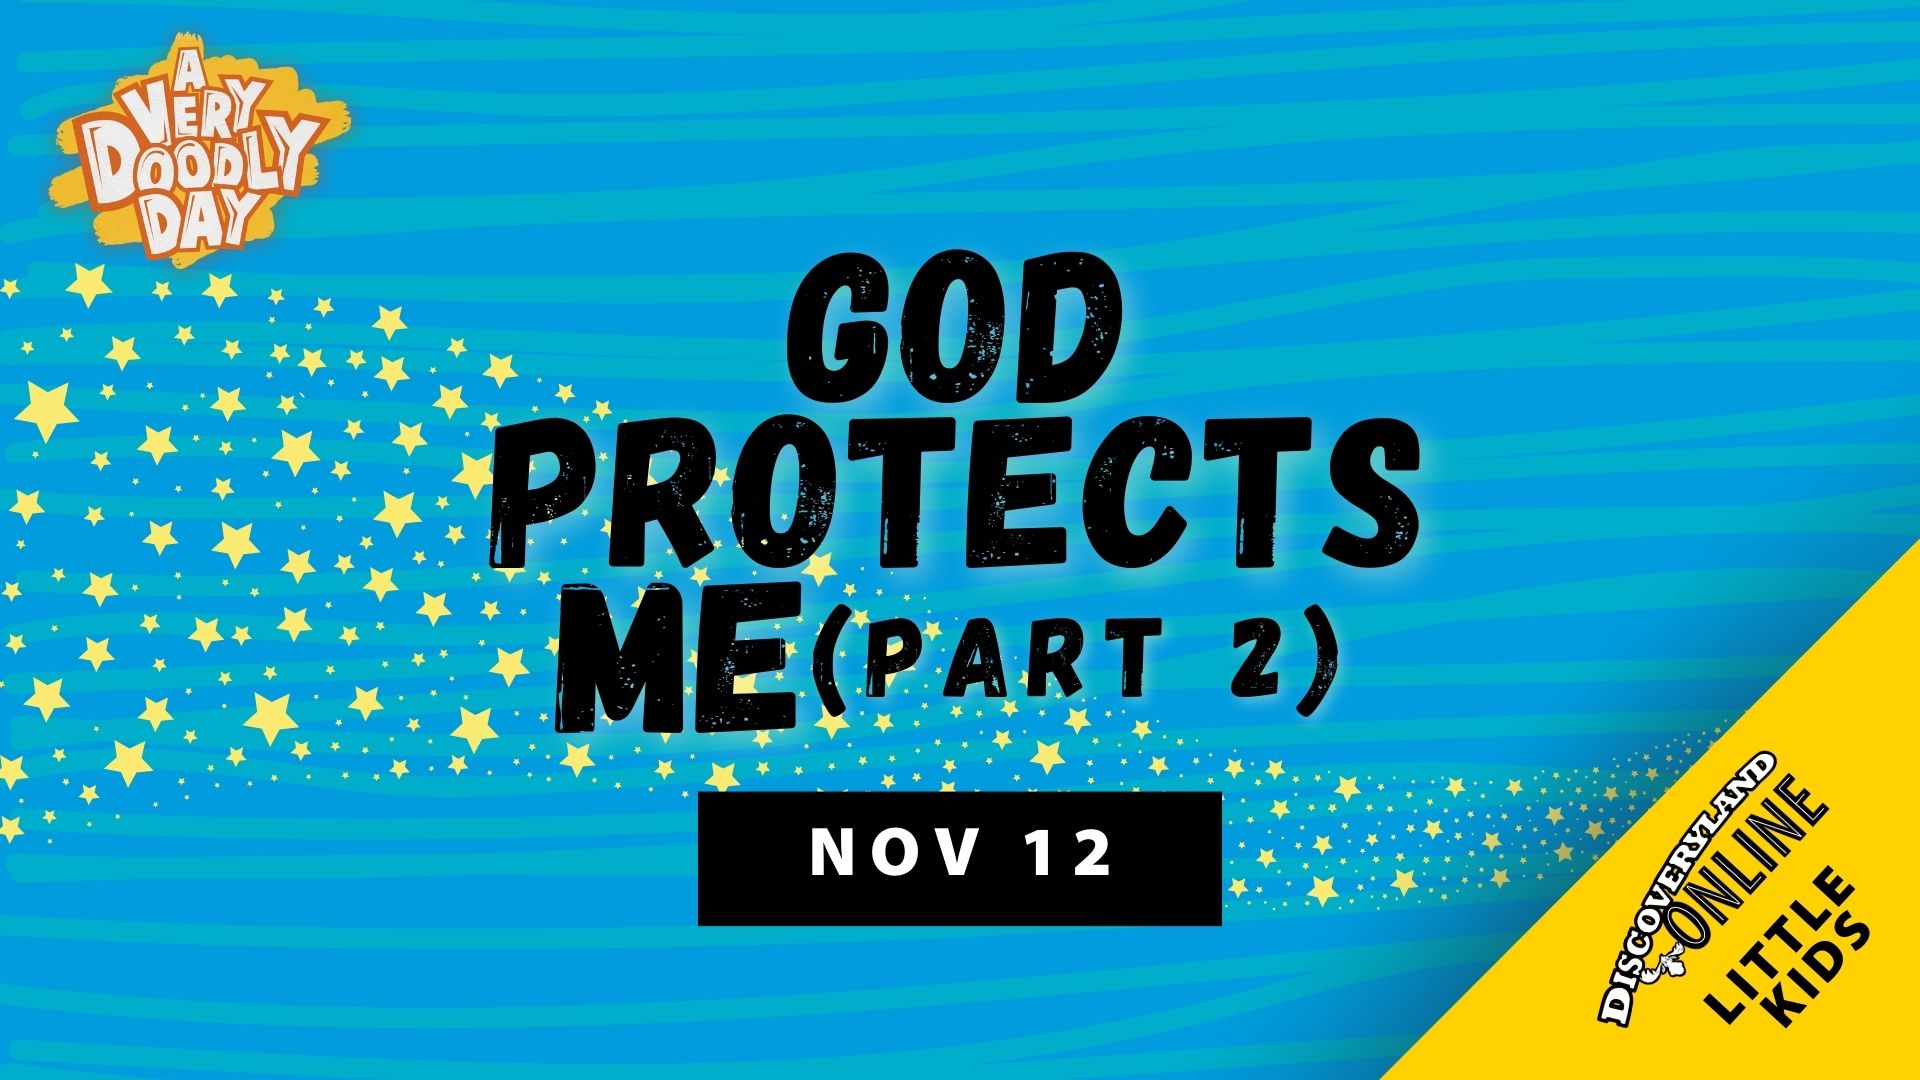 God Protects Me Pt. 2